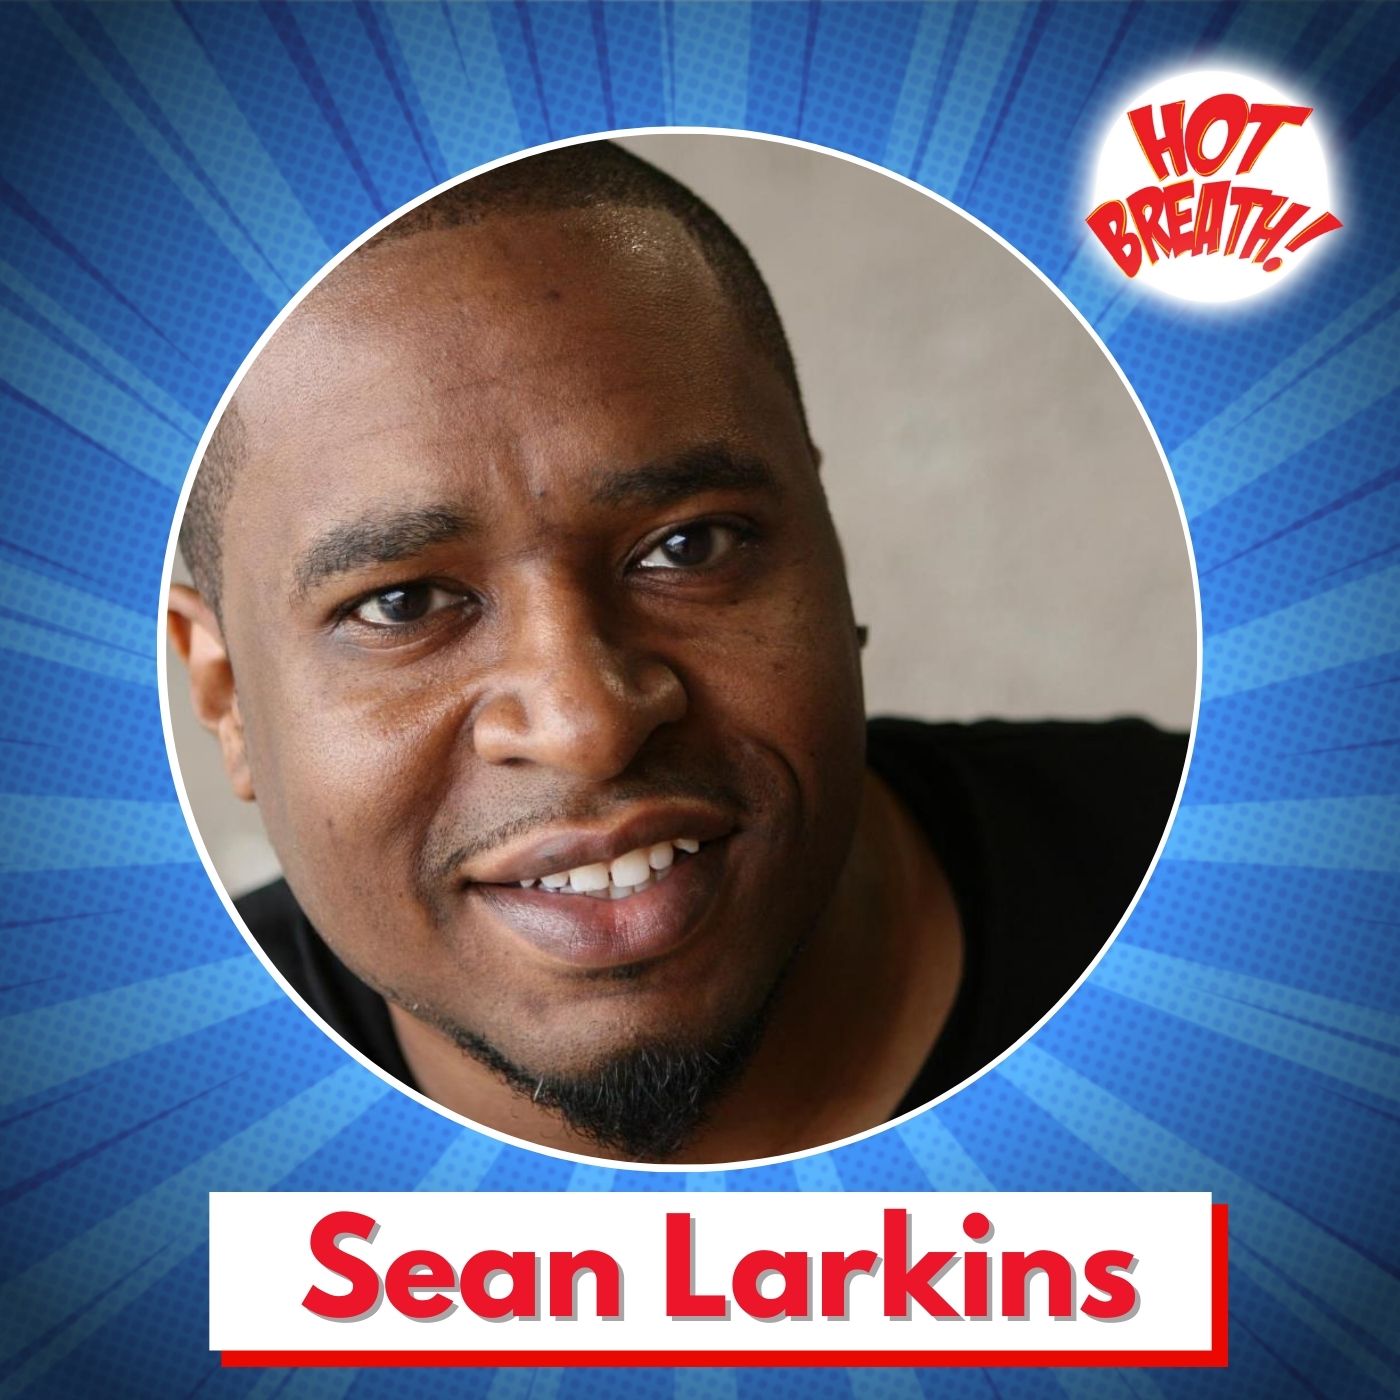 Sean Larkins - Funny Kevin Hart Stories, How to Write for TV, Hollywood  Lessons, + MORE - comedy podcast - Hot Breath! (Learn Comedy from the Pros)